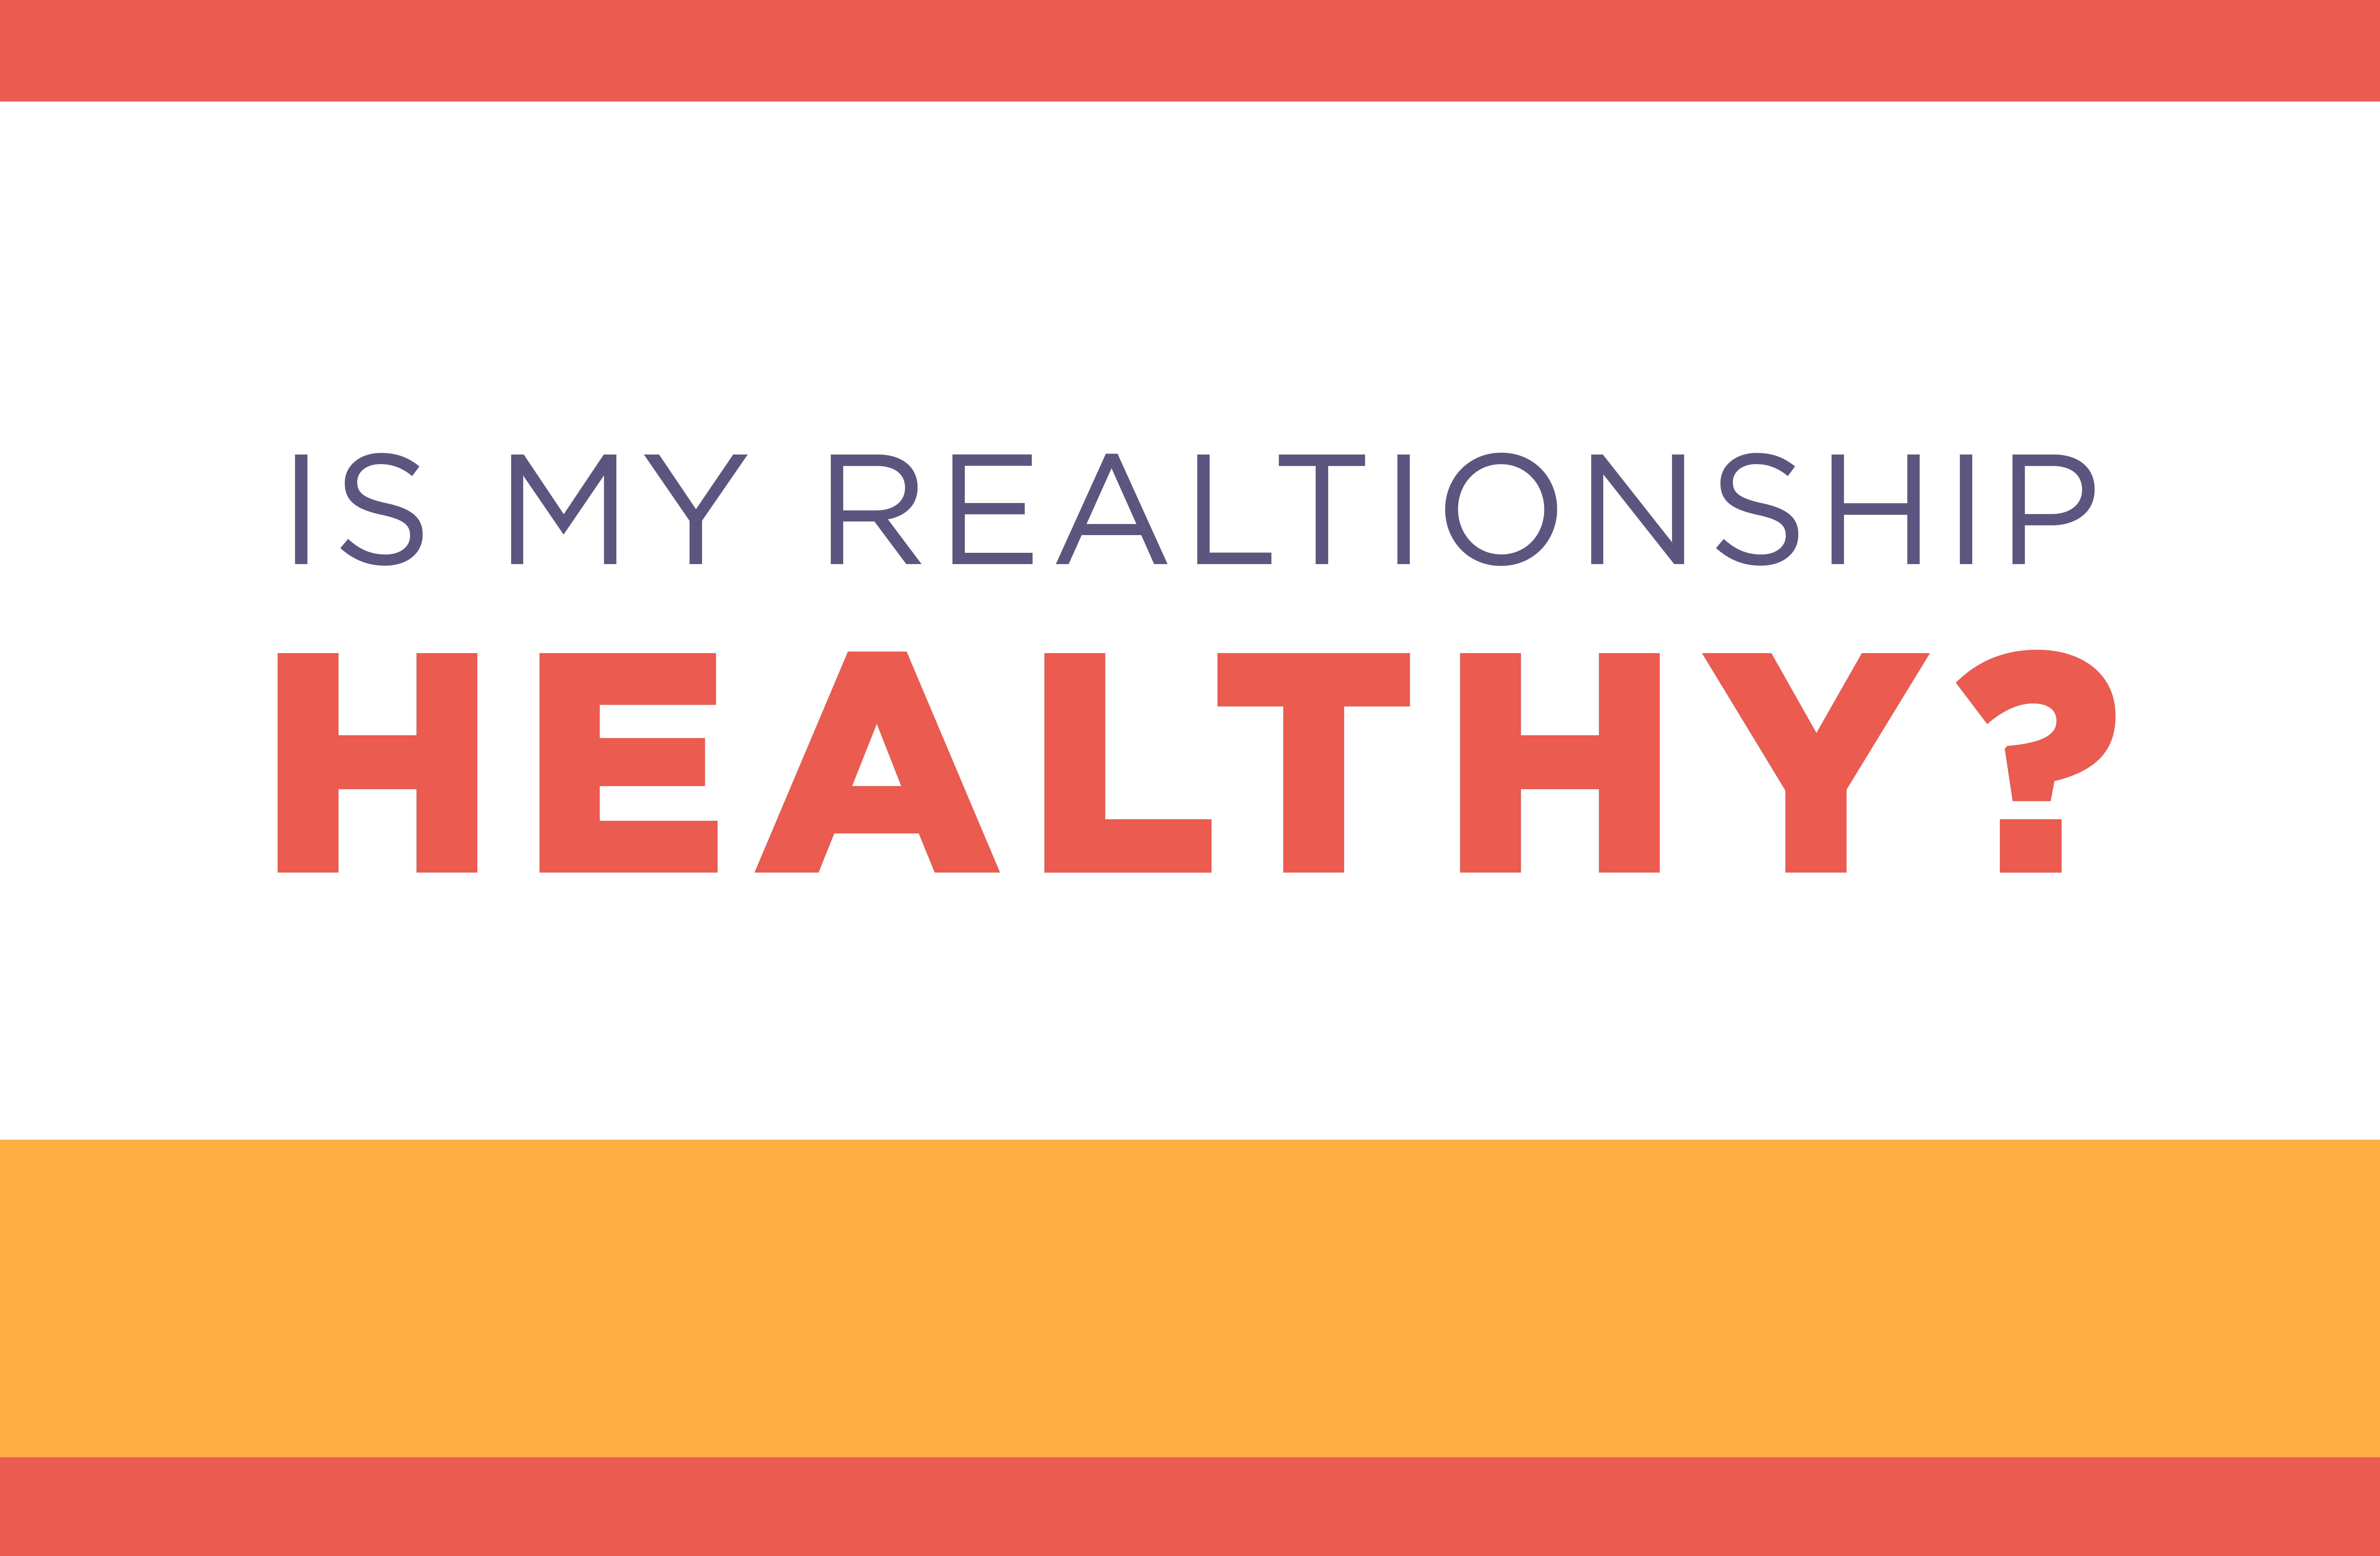 Is my relationship healthy?